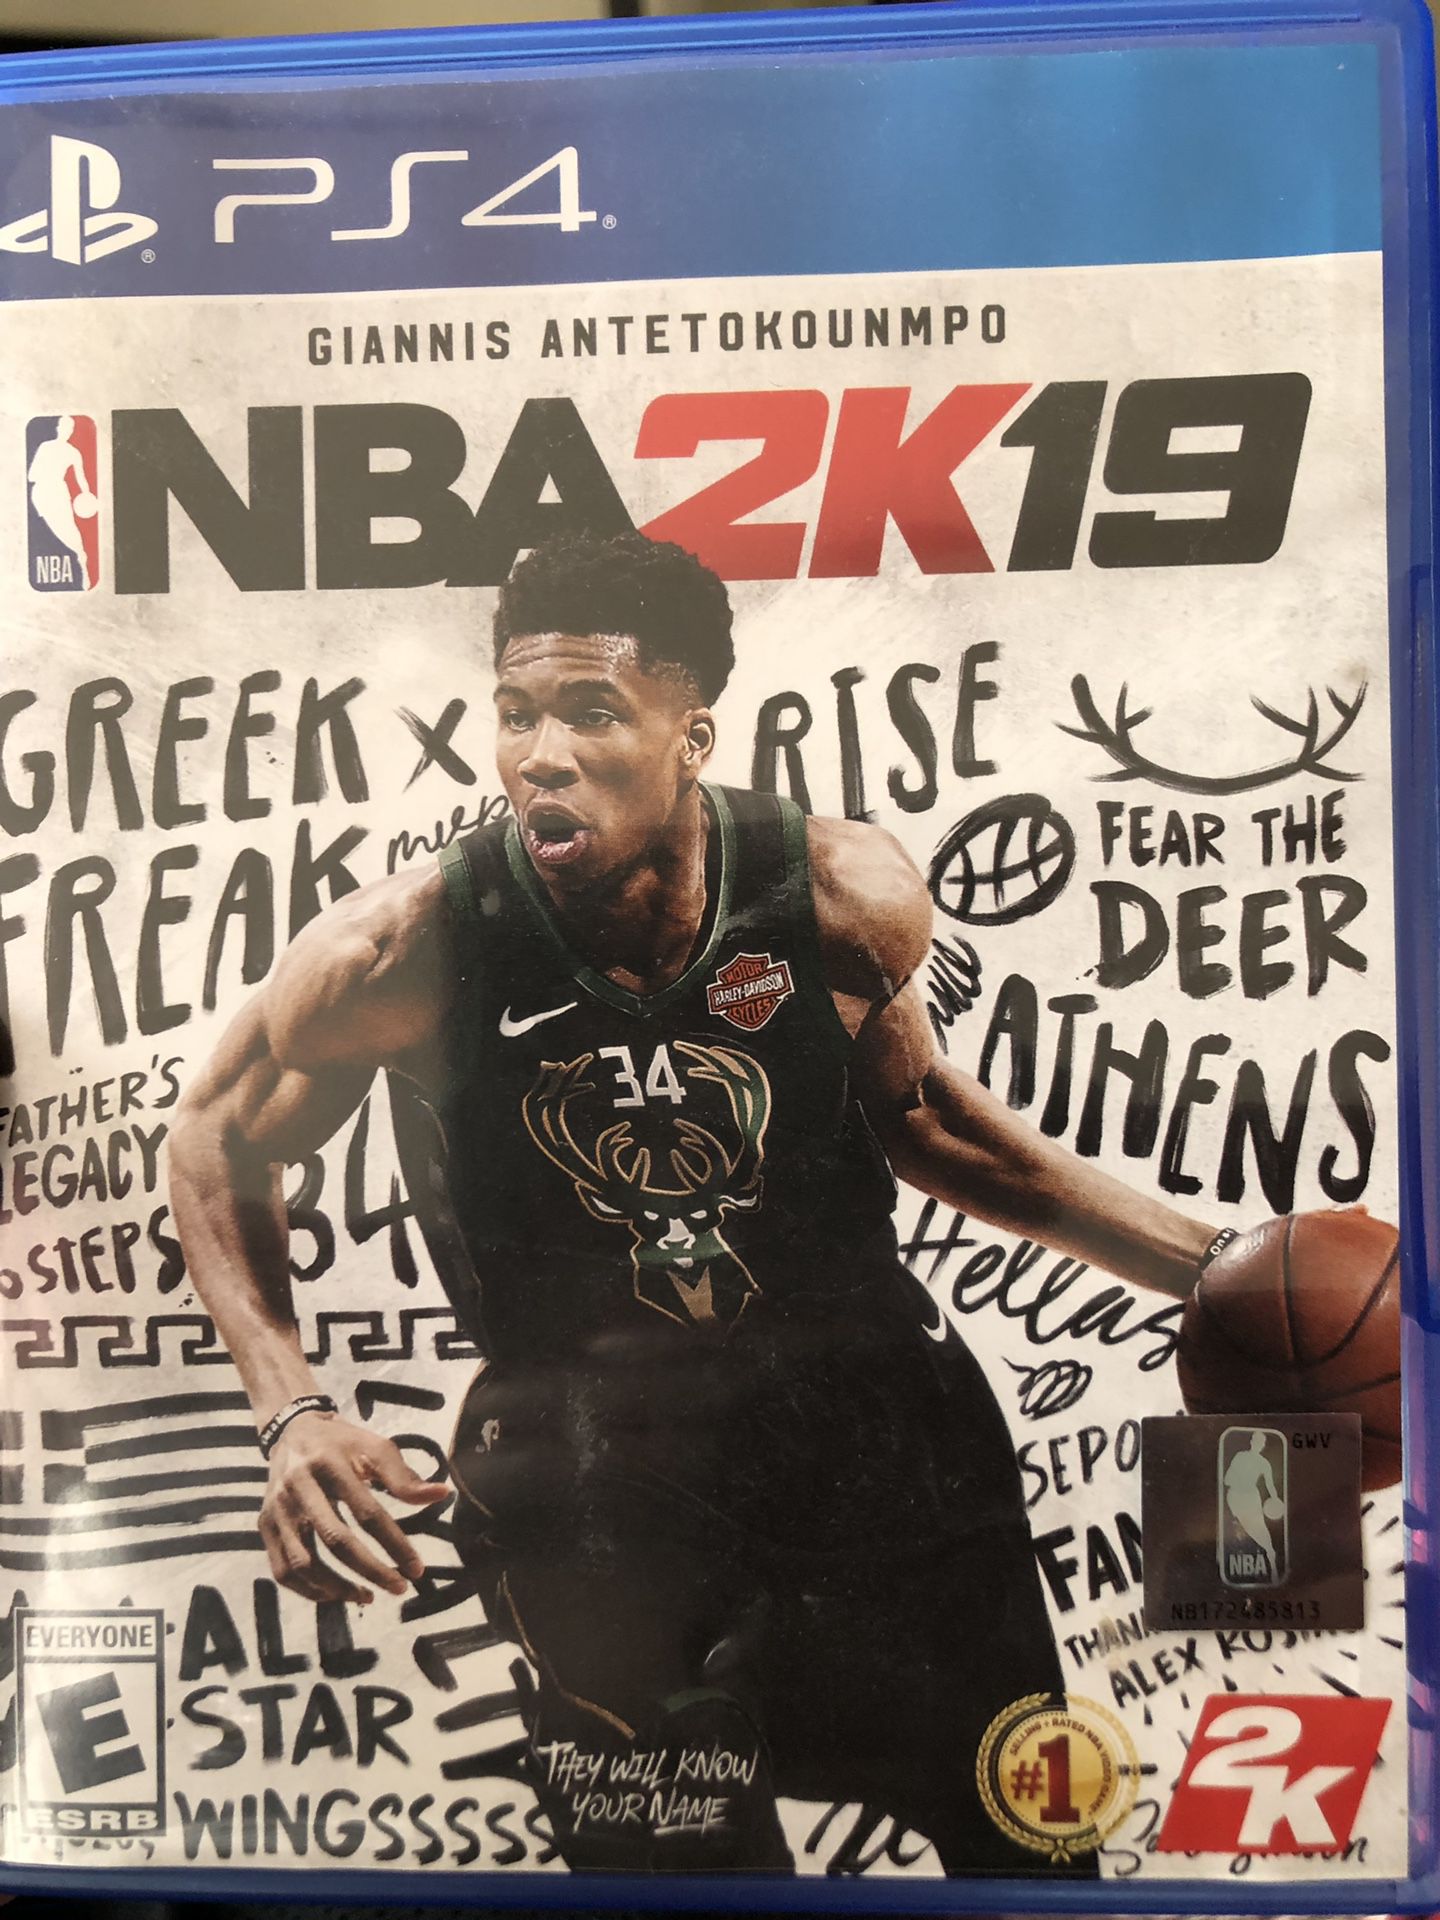 2k19 for PS4